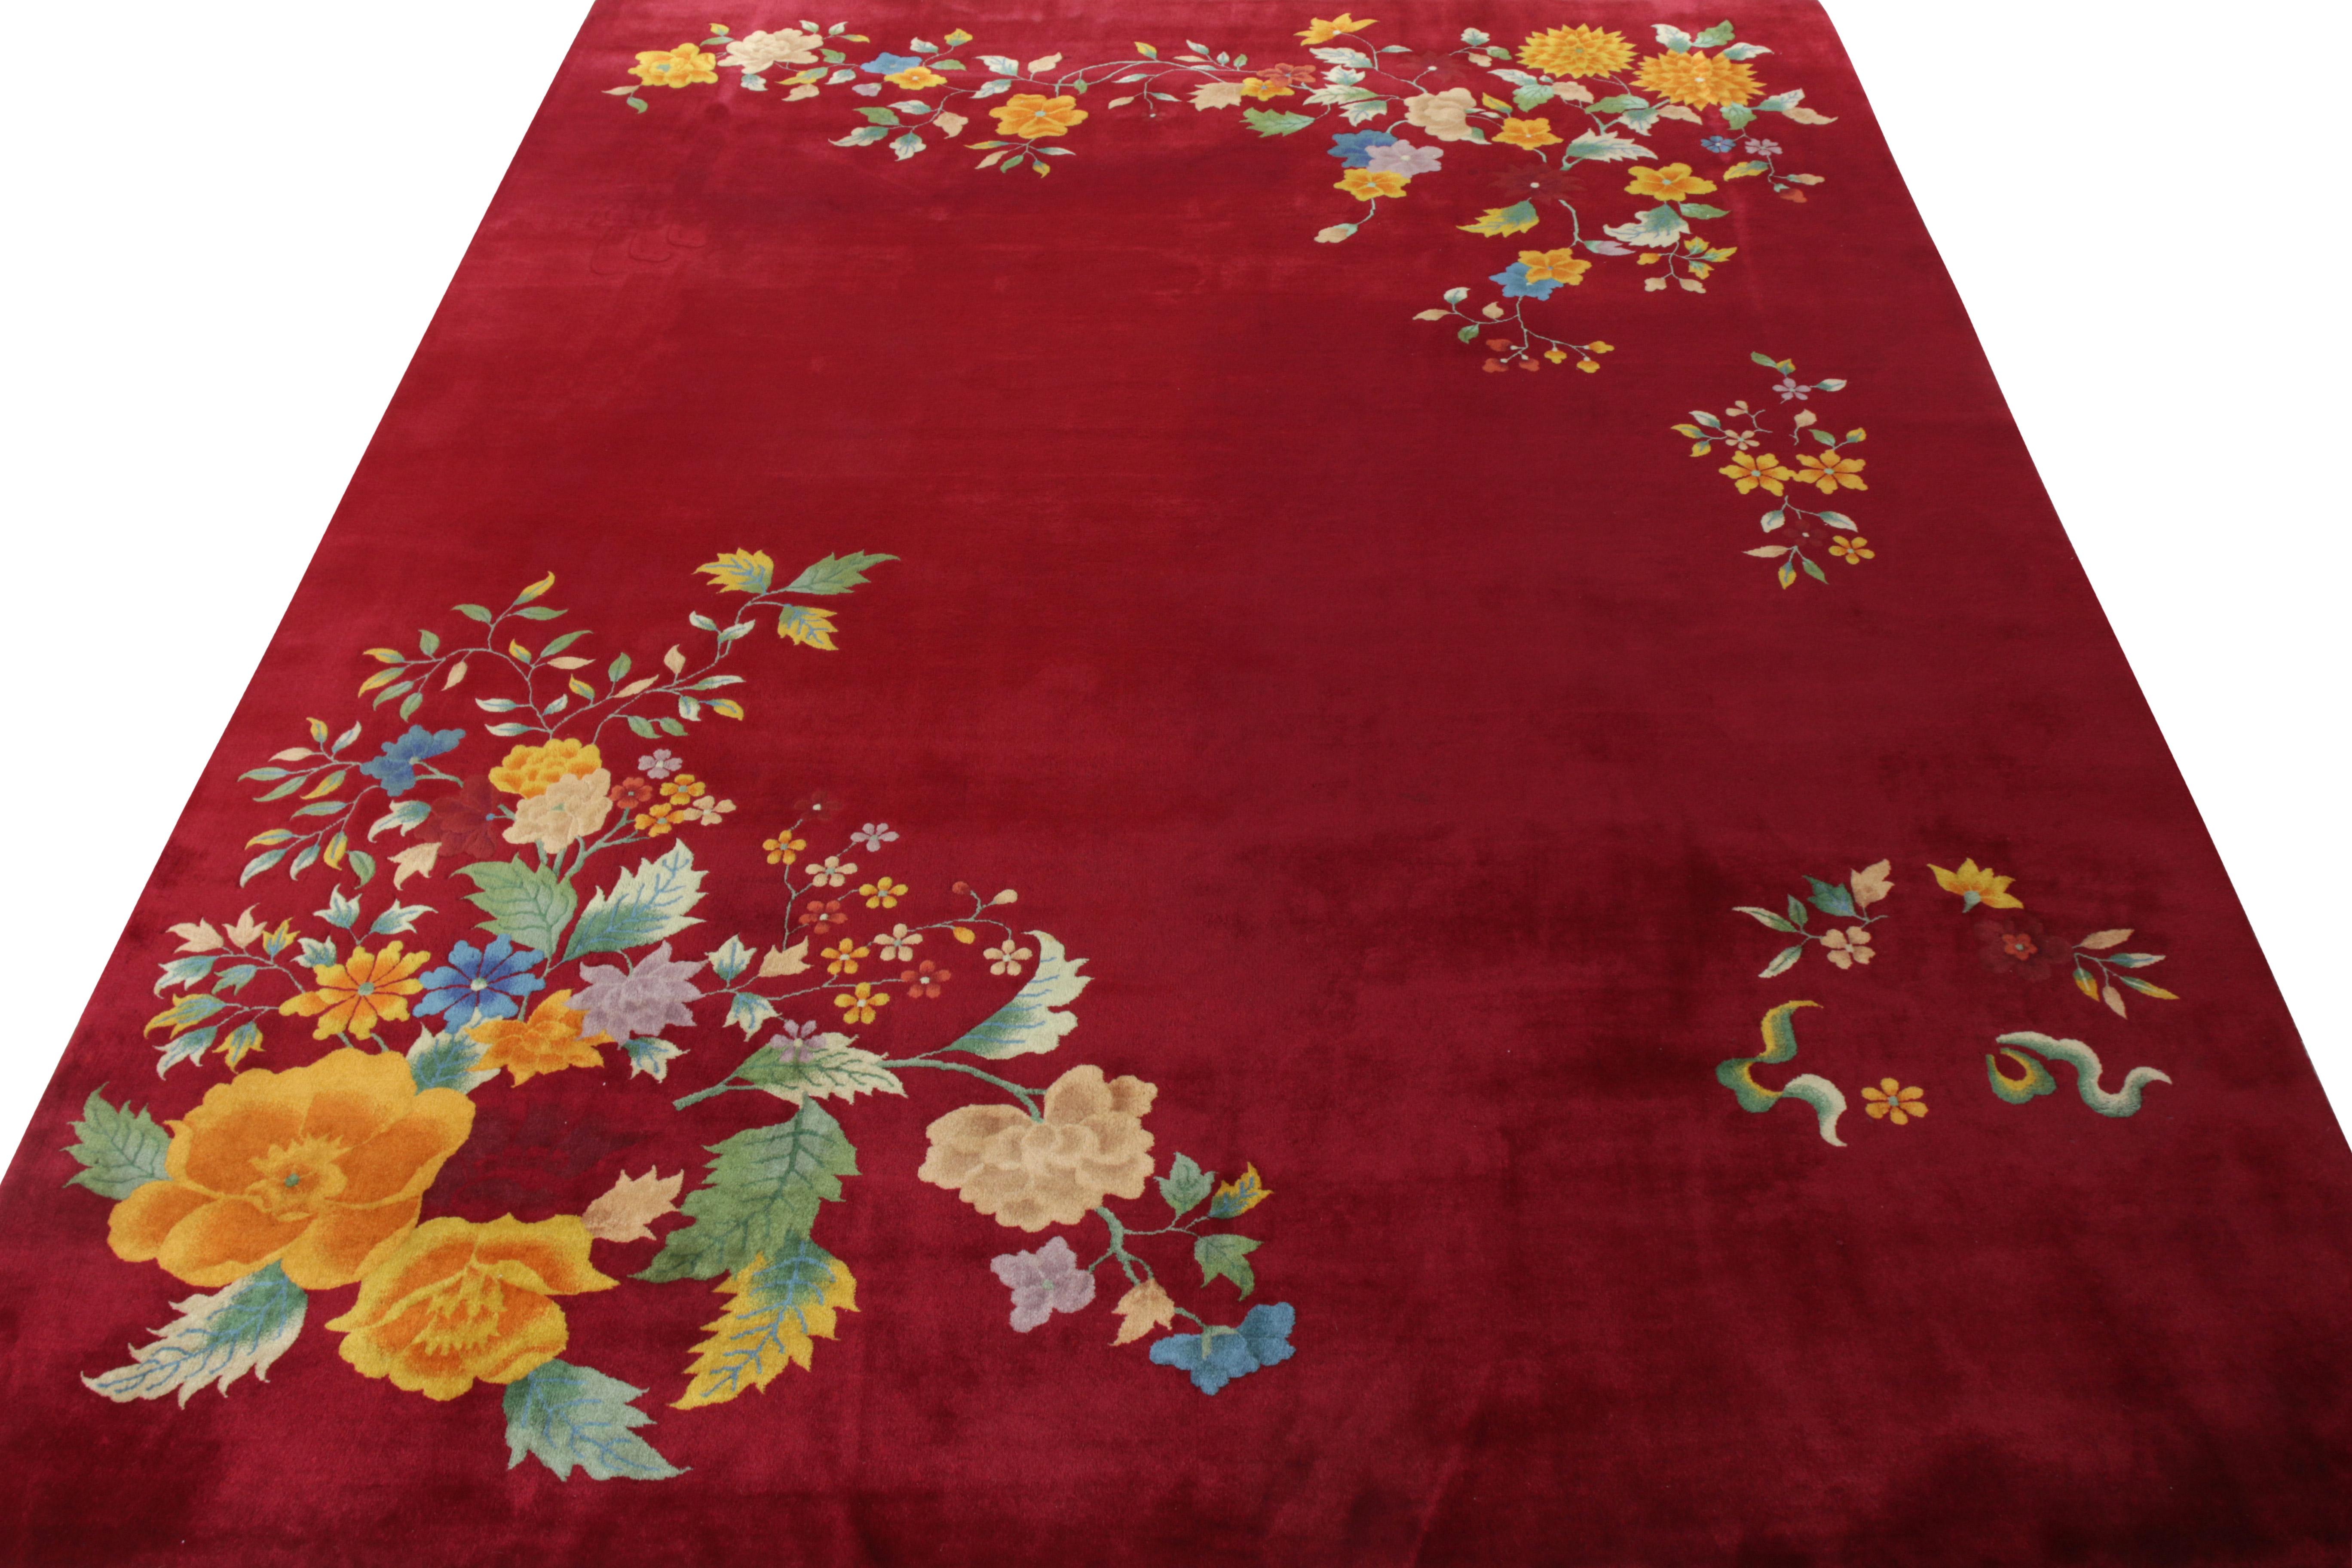 Hand knotted in wool from China circa 1950-1960, a vintage Art Deco rug joining Rug & Kilim’s Antique & Vintage Collection. Drawing on 1920s style in mid-century quality with a delicious wool of lustrous appeal, the rug features an enticing floral